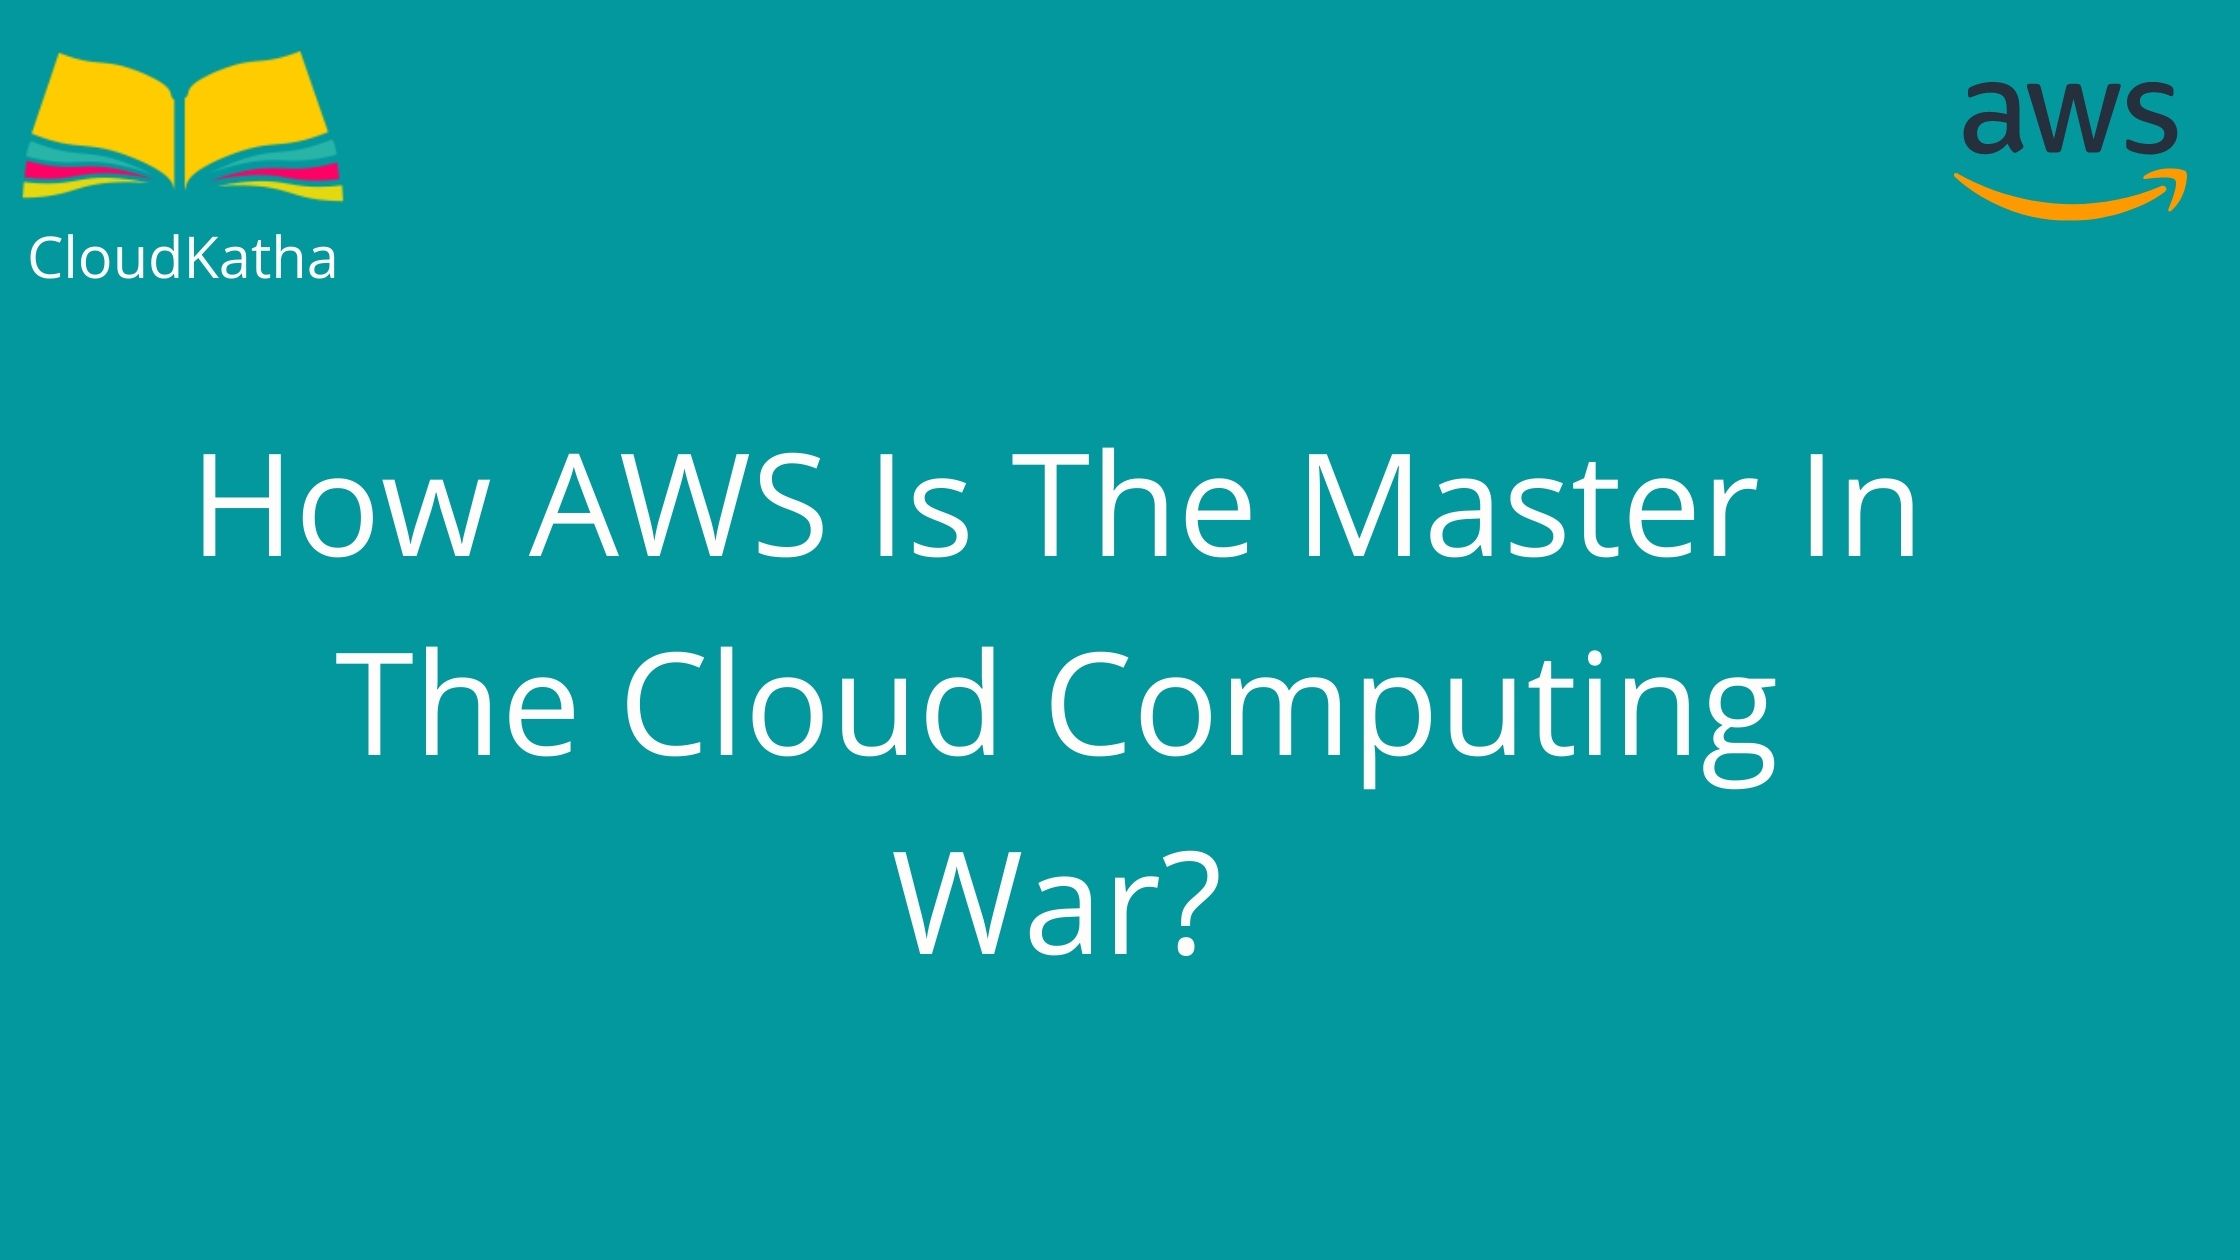 How AWS Is The Master In The Cloud Computing War?